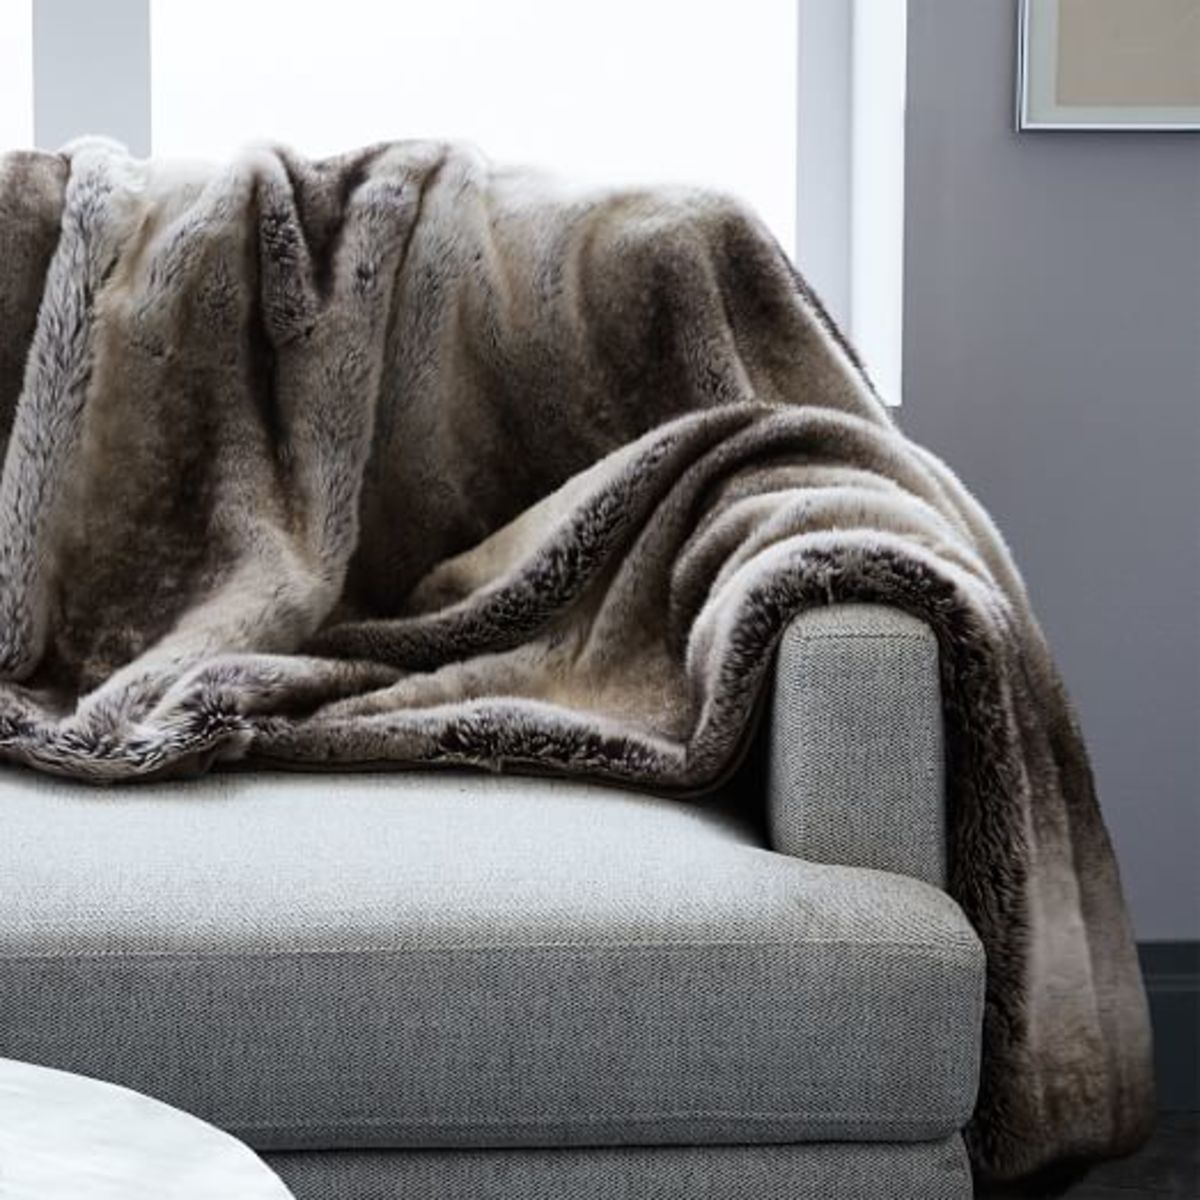 Cozy Sustainable Throws